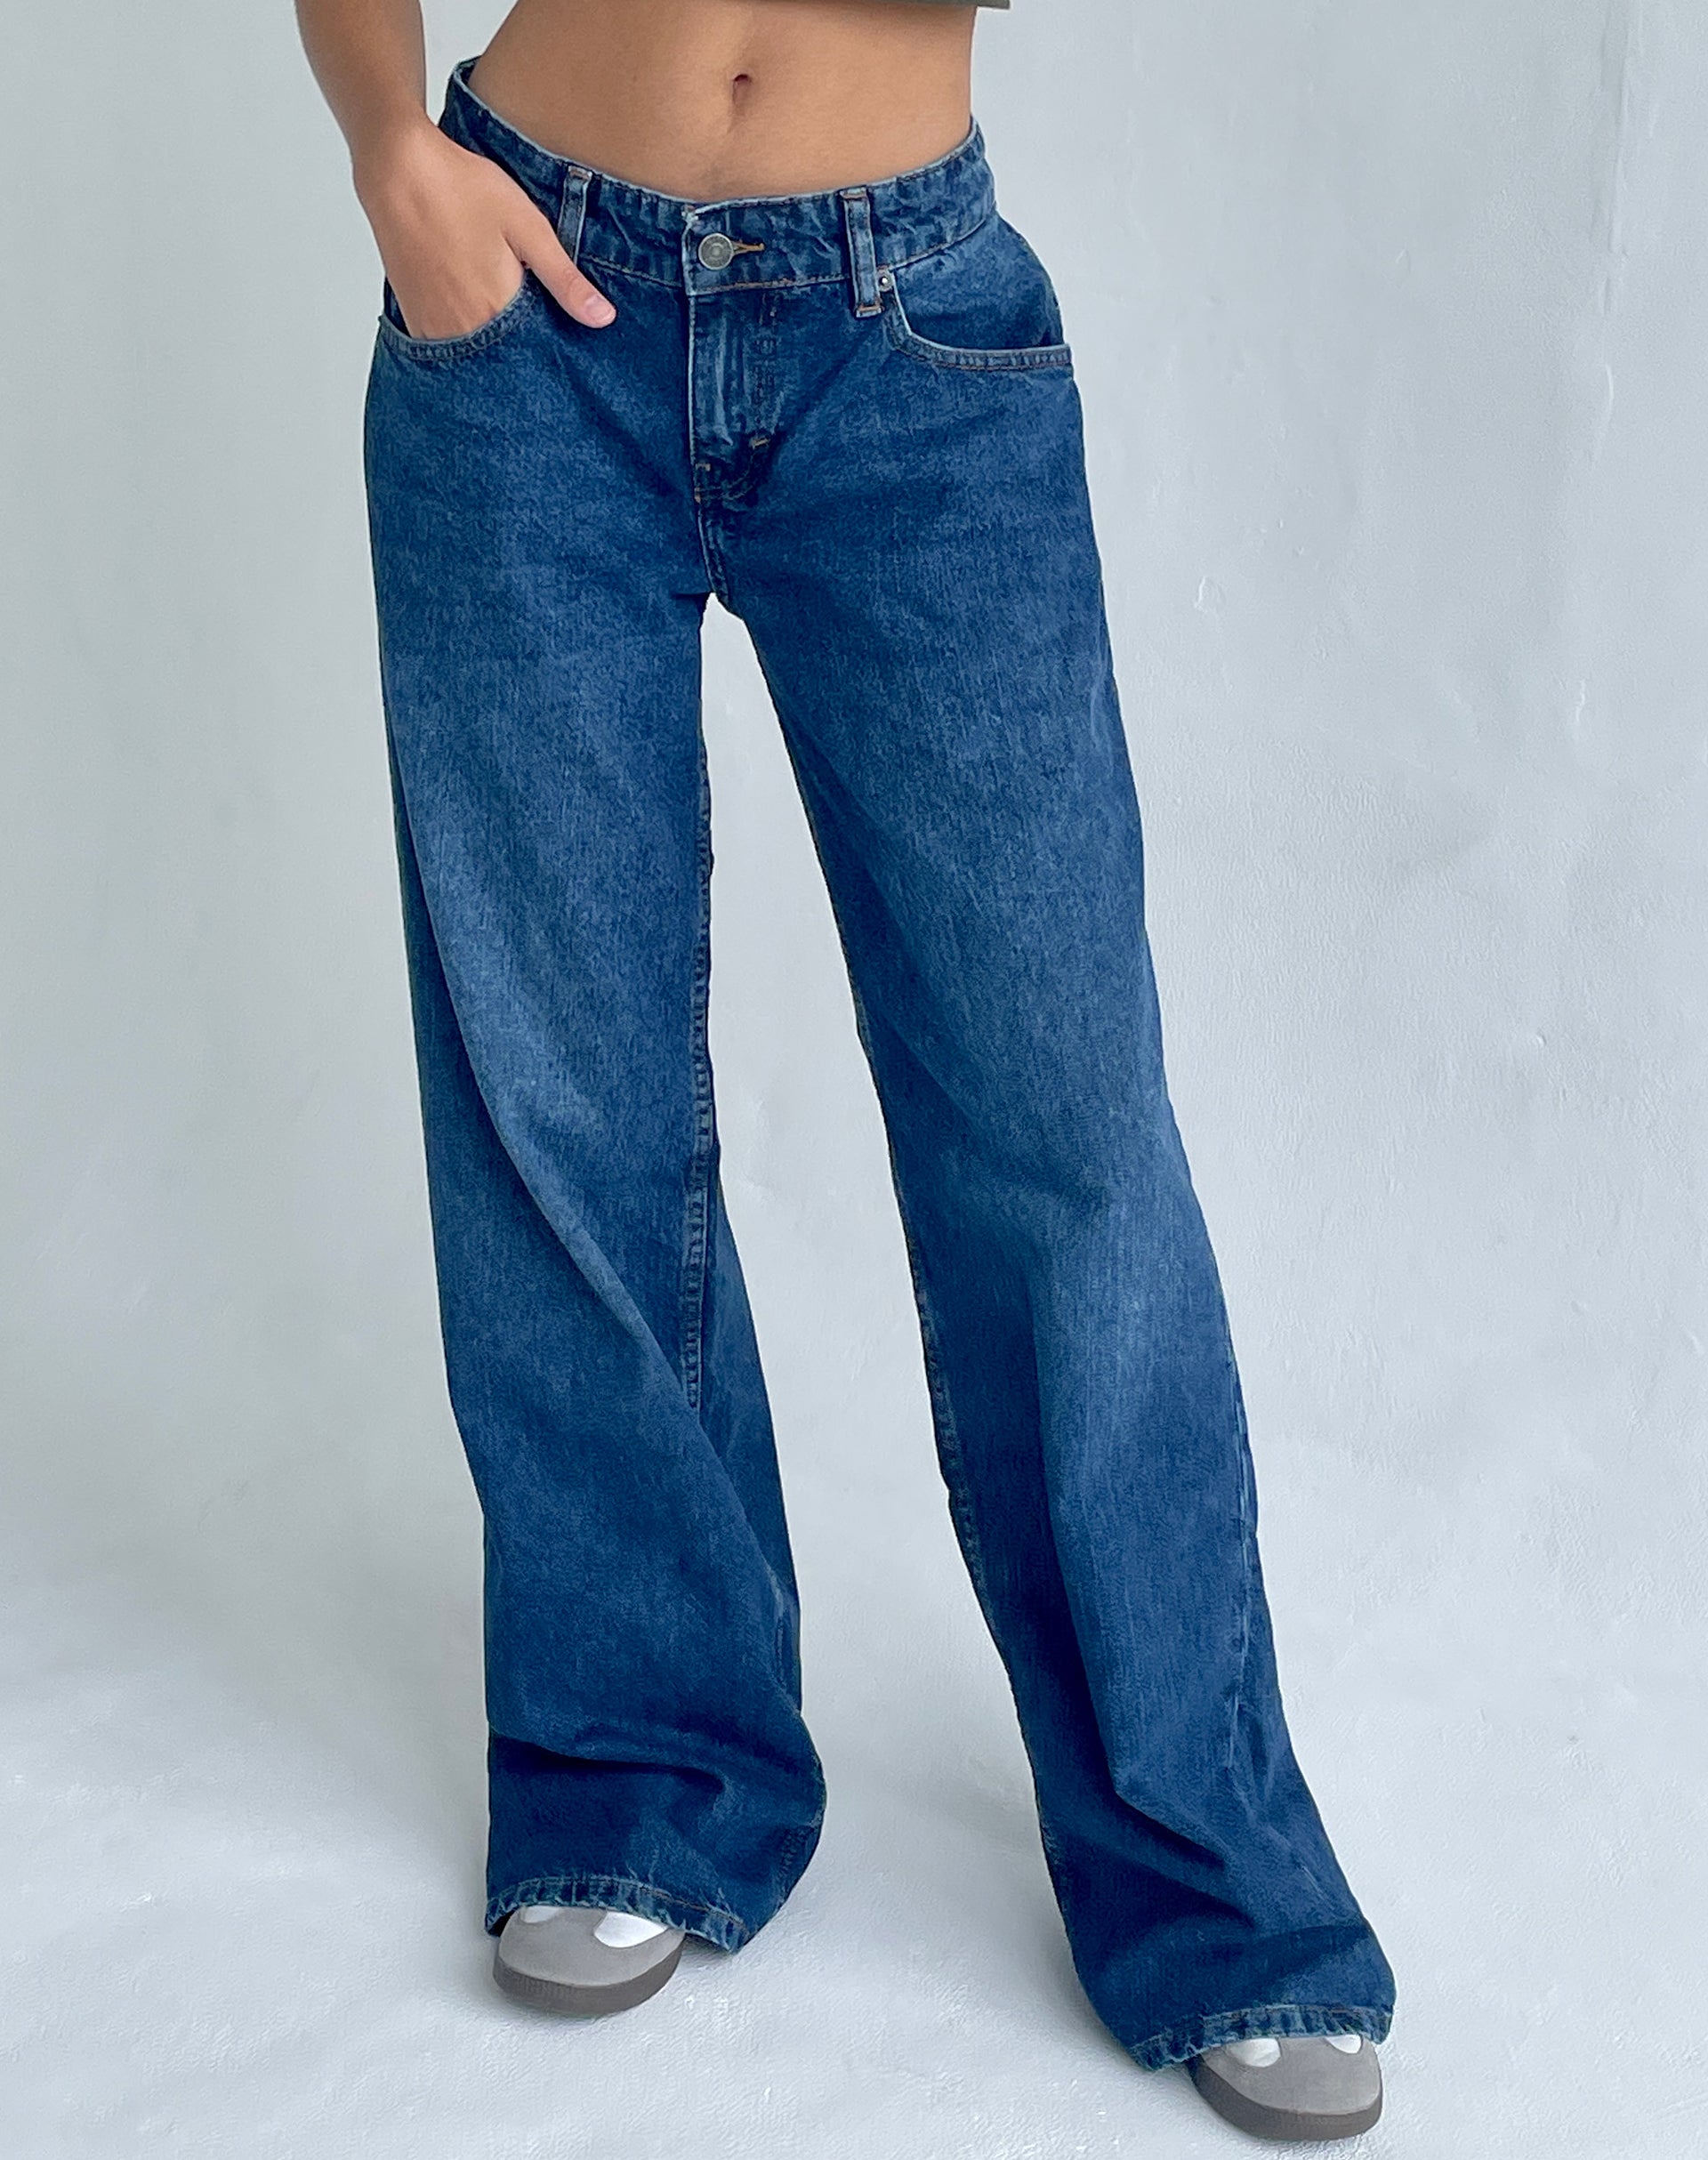 Image of MOTEL X JACQUIE Roomy Extra Wide Low Rise Jeans in Mid Blue Used